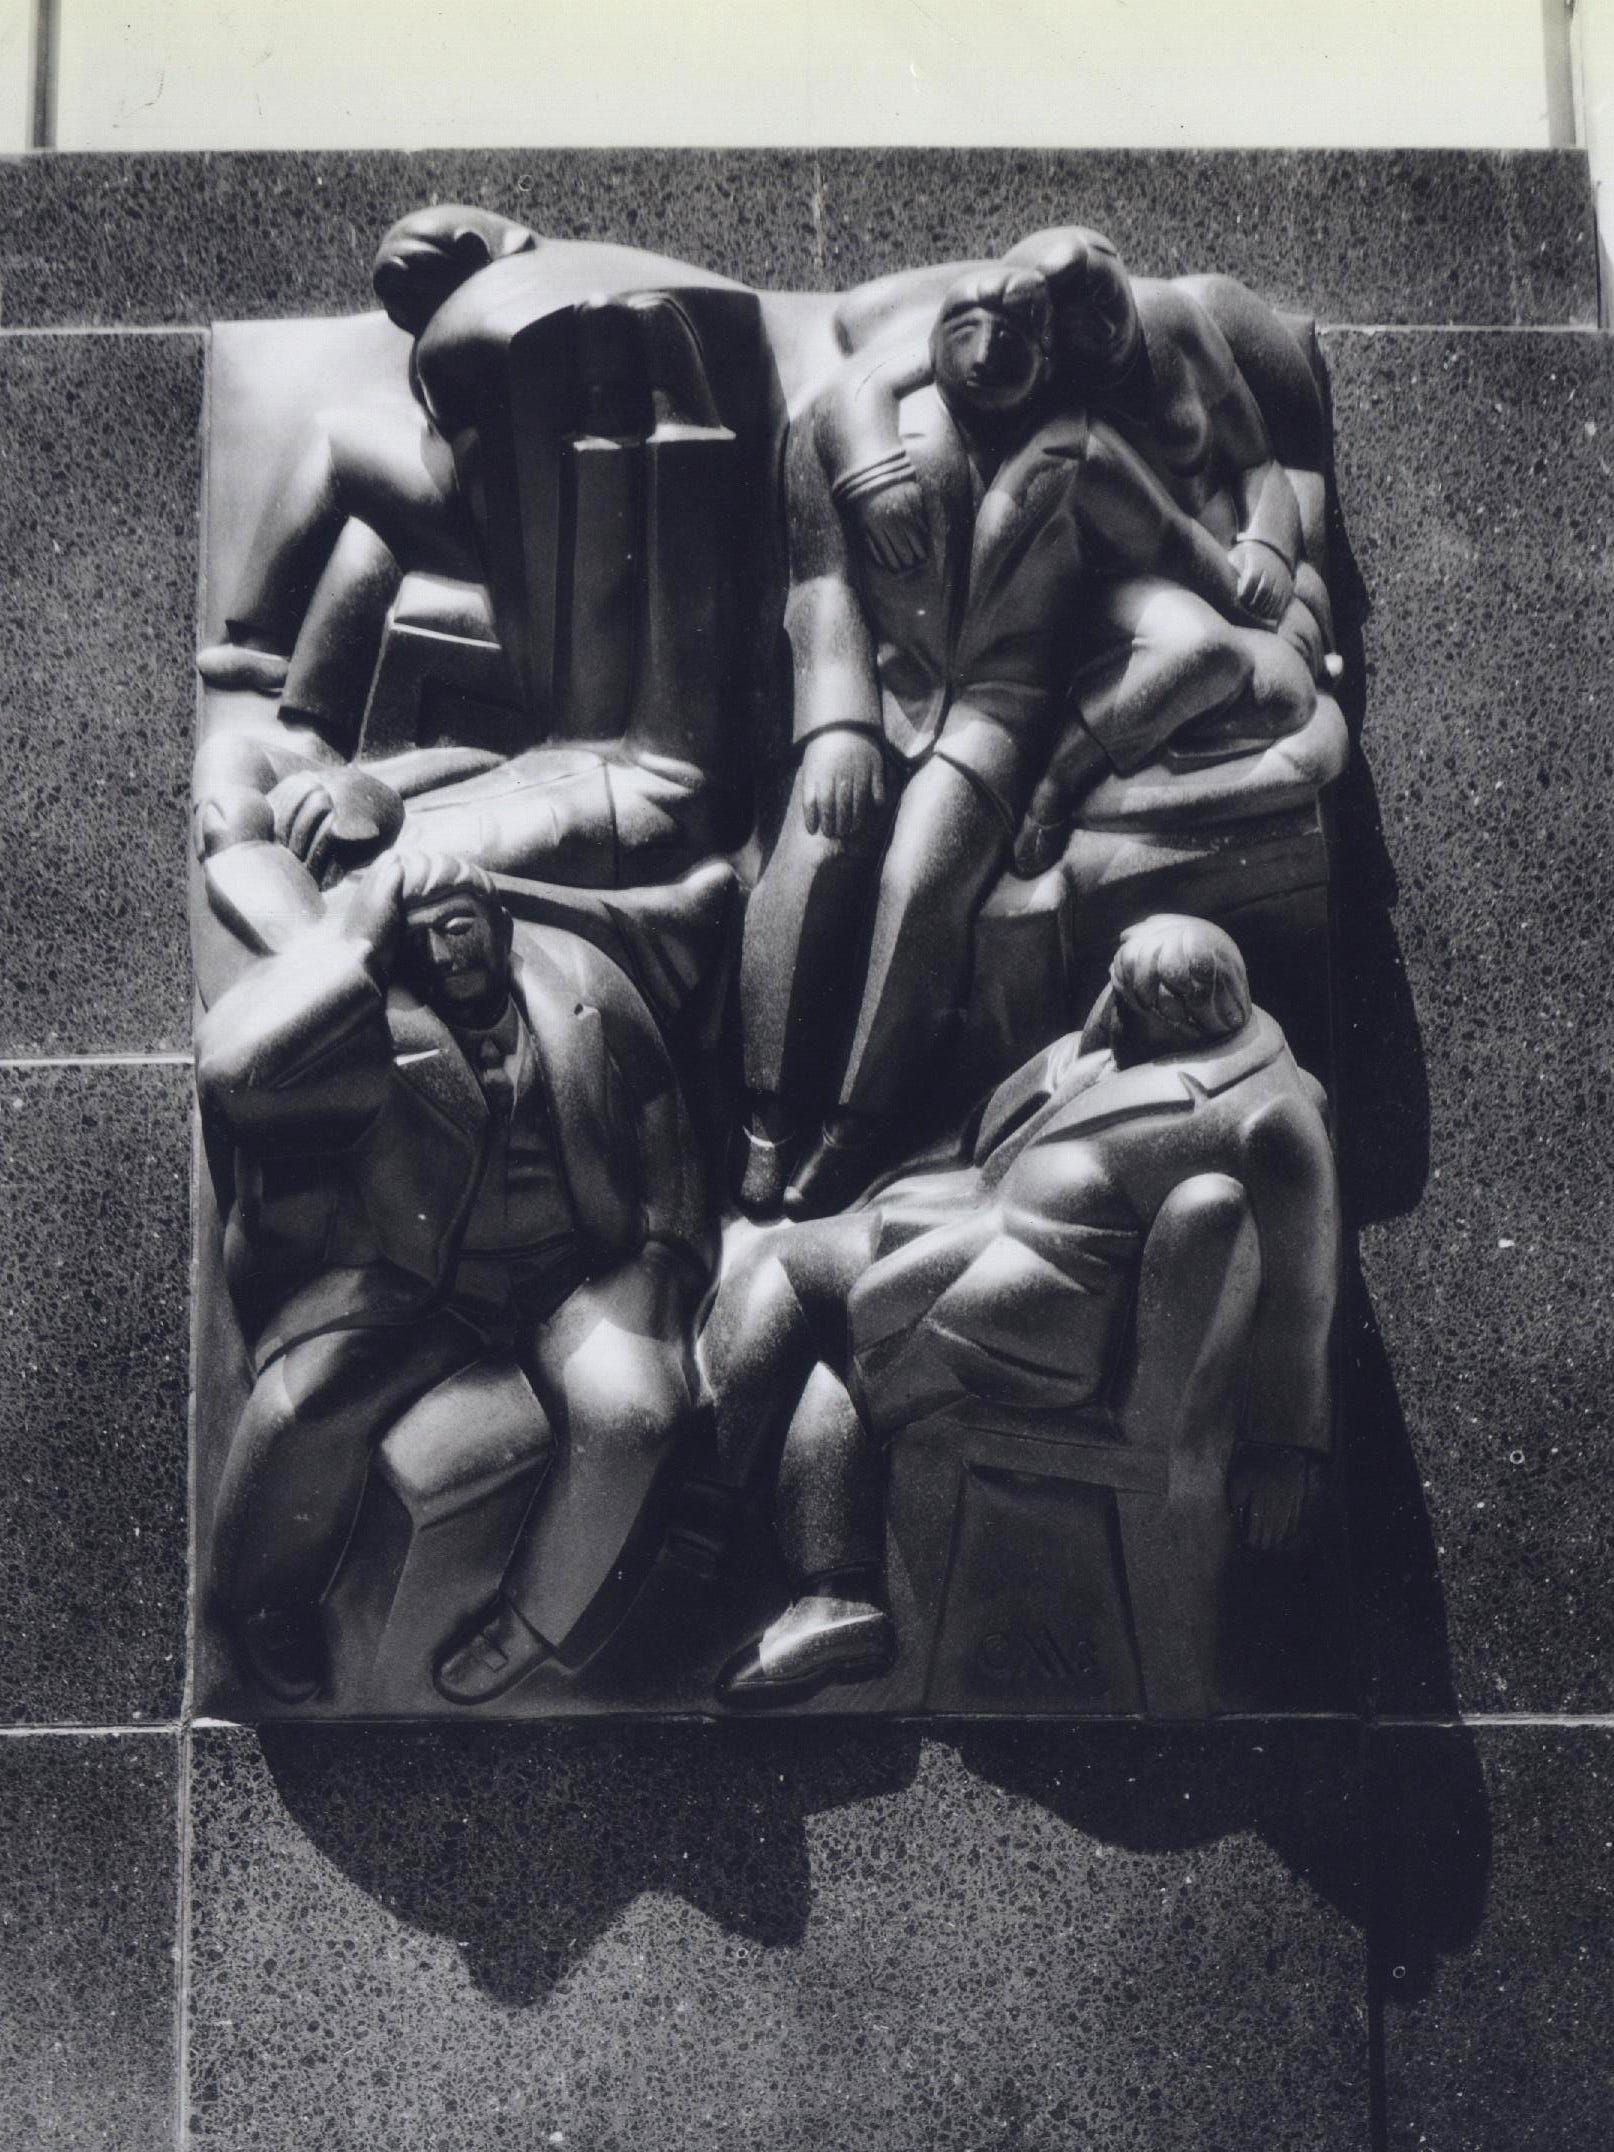 The other plaque depicts radio listeners in varying states of wakefulness and interest - one even lying on his back with feet in air.  Albert Kahn characterized Carl Milles as "perhaps the world's greatest living sculptor."